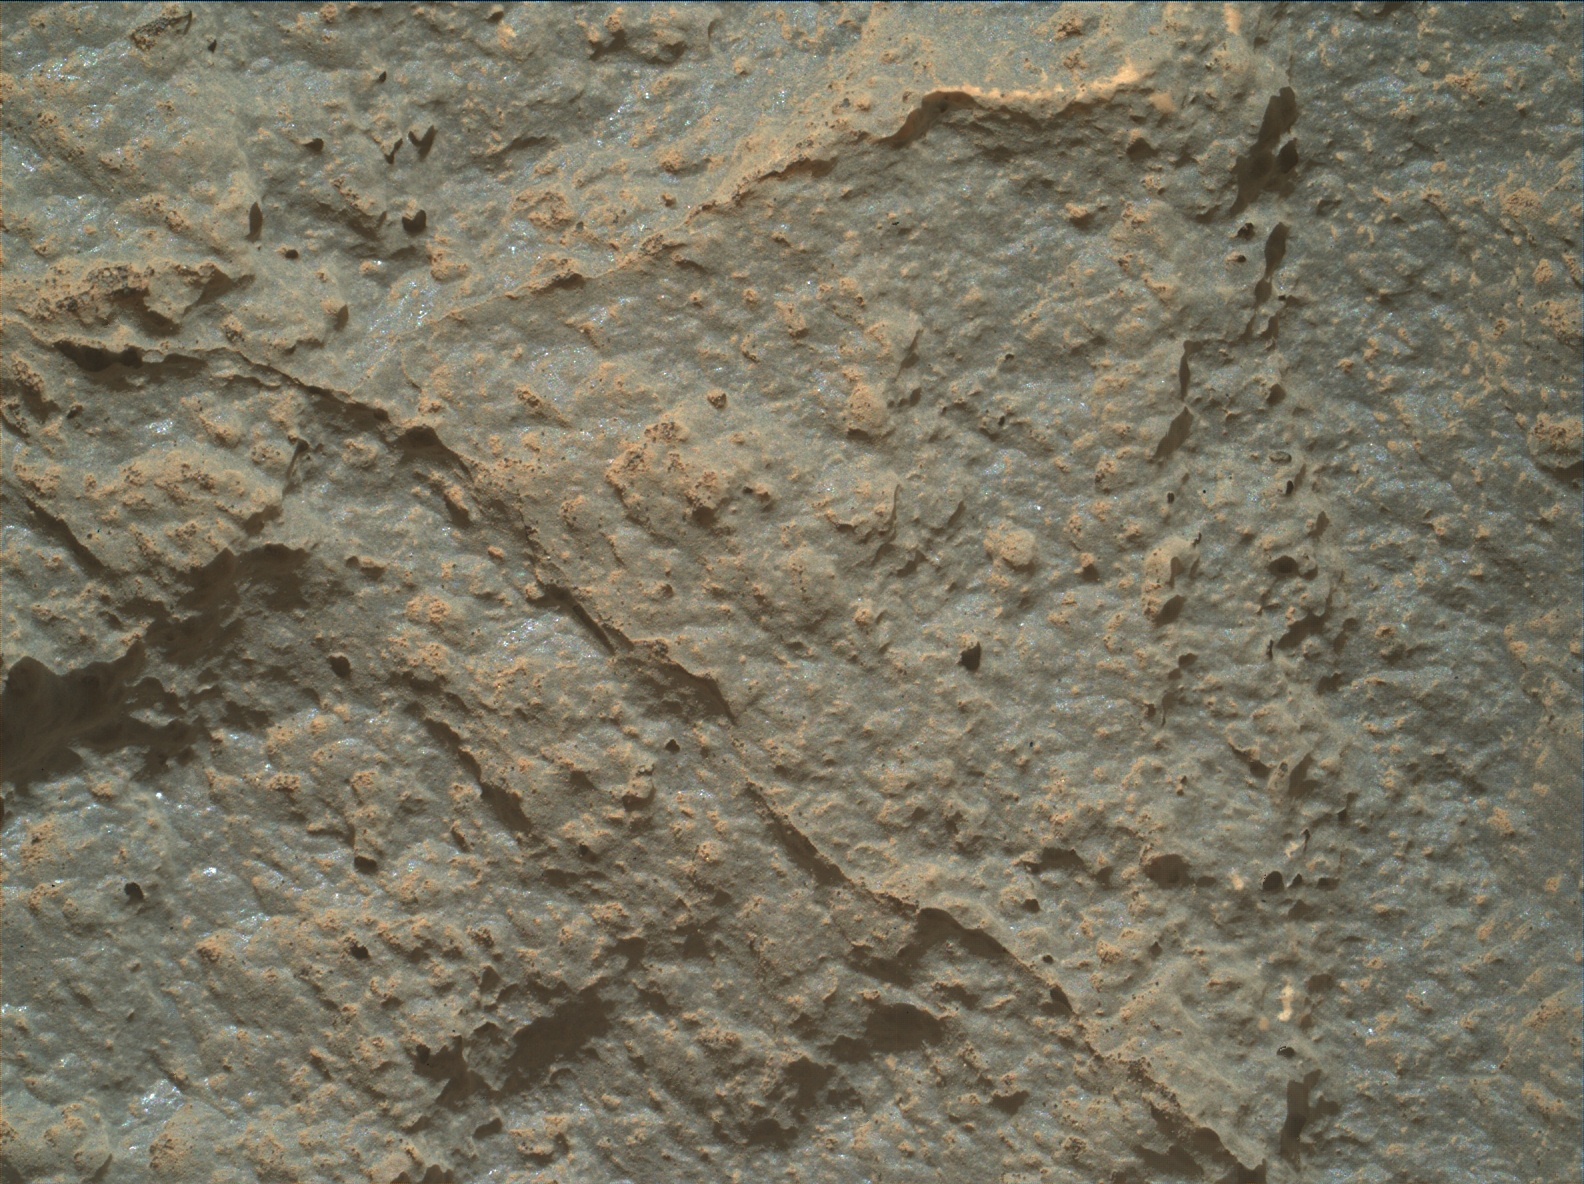 Nasa's Mars rover Curiosity acquired this image using its Mars Hand Lens Imager (MAHLI) on Sol 2633